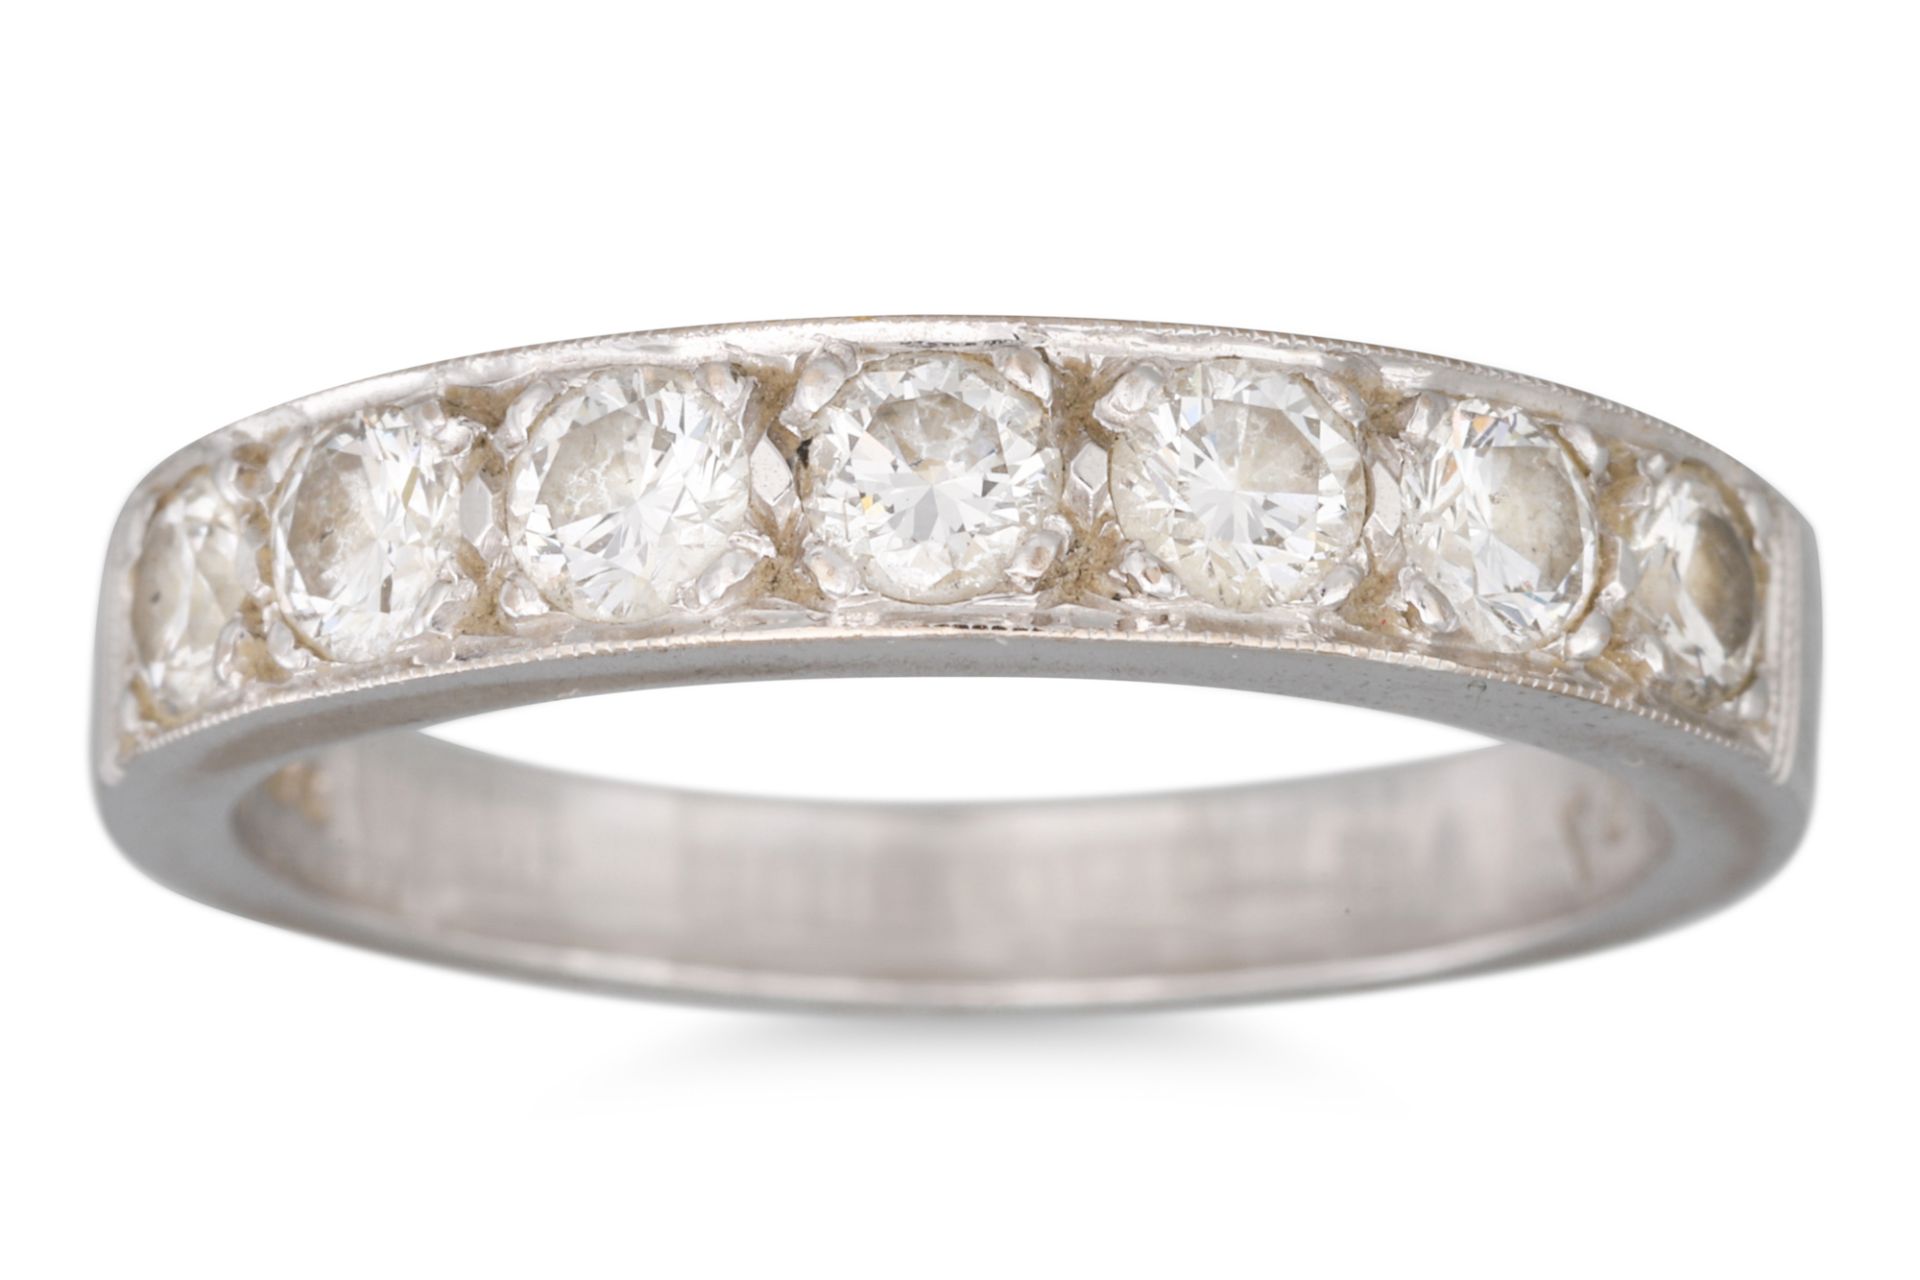 A DIAMOND HALF ETERNITY RING, the brilliant cut diamonds mounted in 18ct white gold, size M - N.